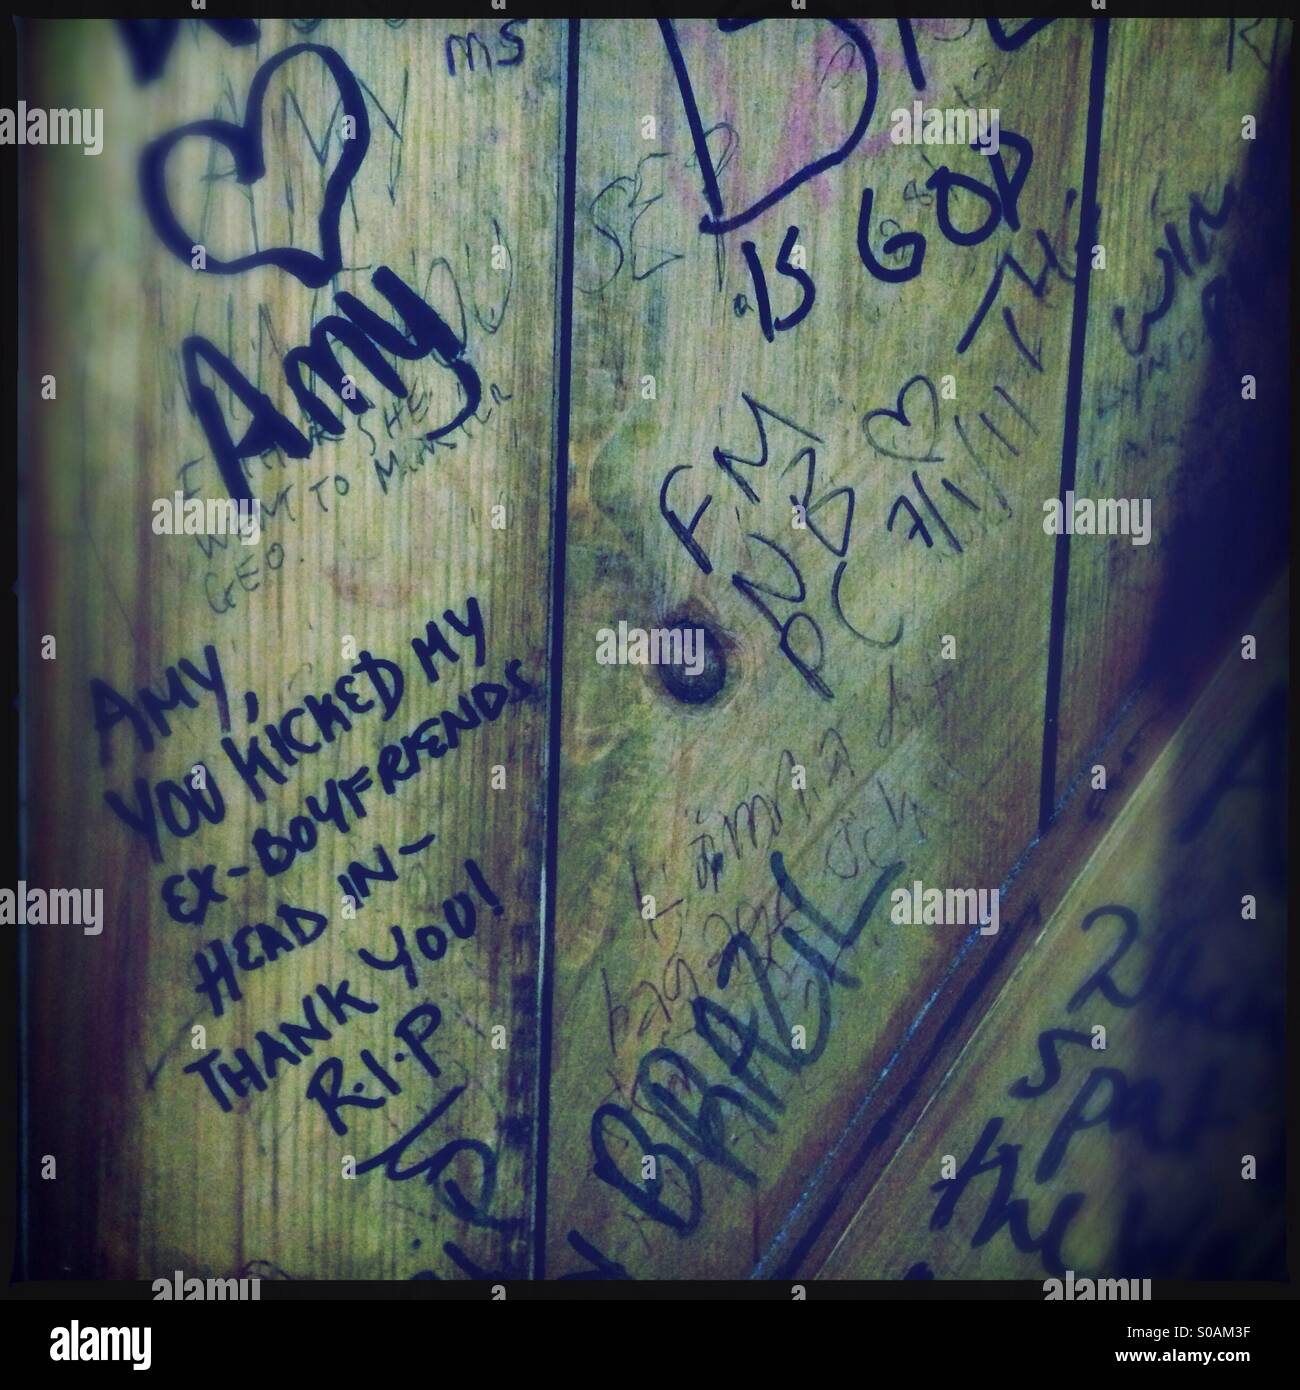 Toilet cubicle door in the Hawley Arms with graffiti tributes to Amy Winehouse Stock Photo